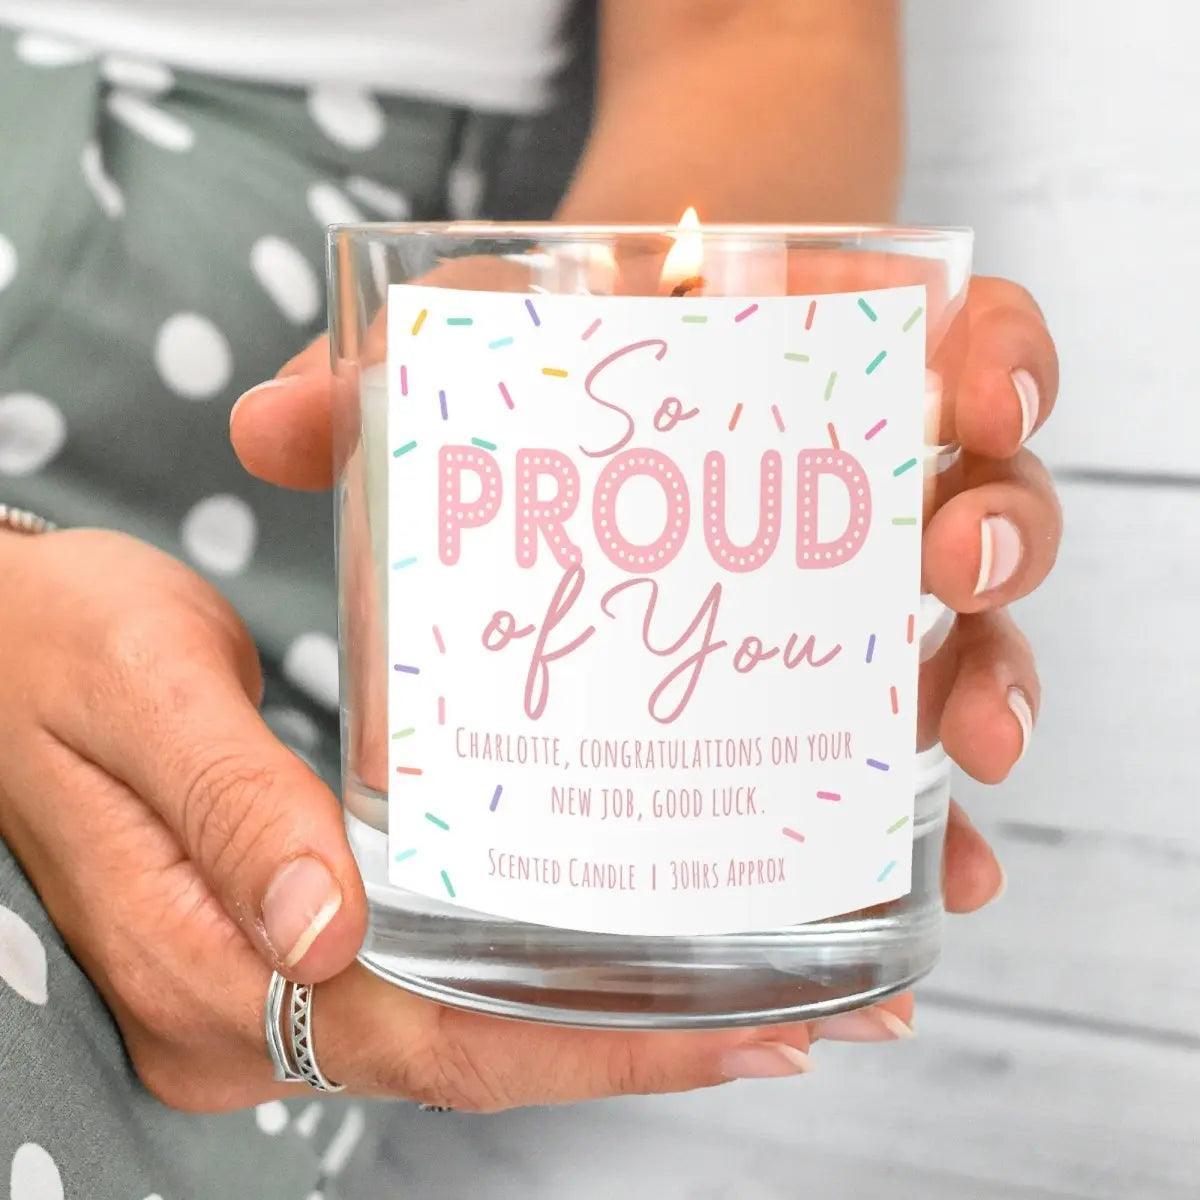 Personalised Congratulations Candle, Well Done Gift, Congratulations Gifts, New Job Gift, New Home Gift, So Proud of You, Driving Test Gift - Amy Lucy